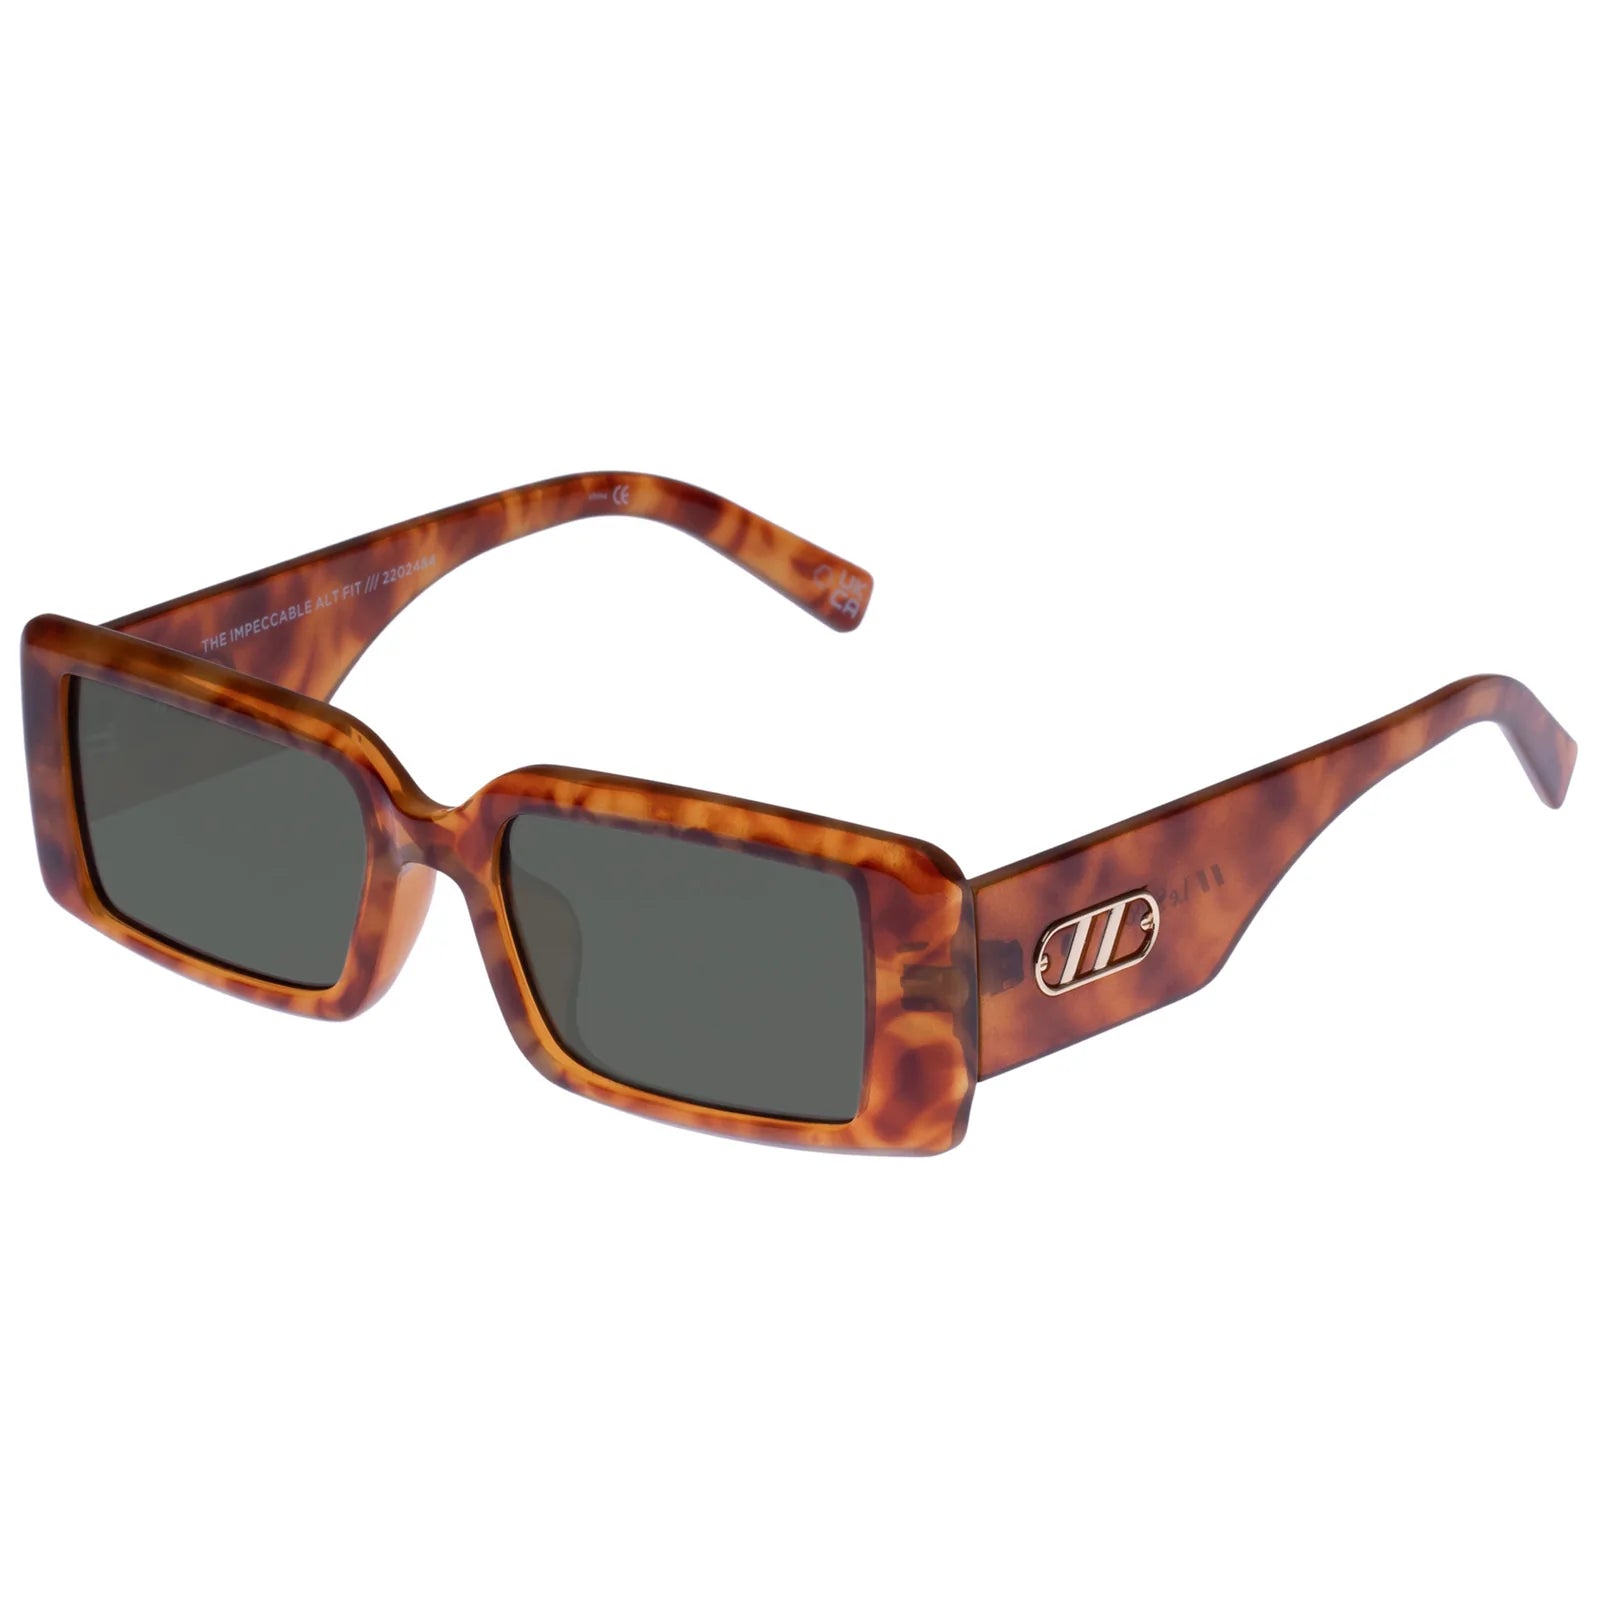 Le Specs Sunglasses The Impeccable - Toffee Tort